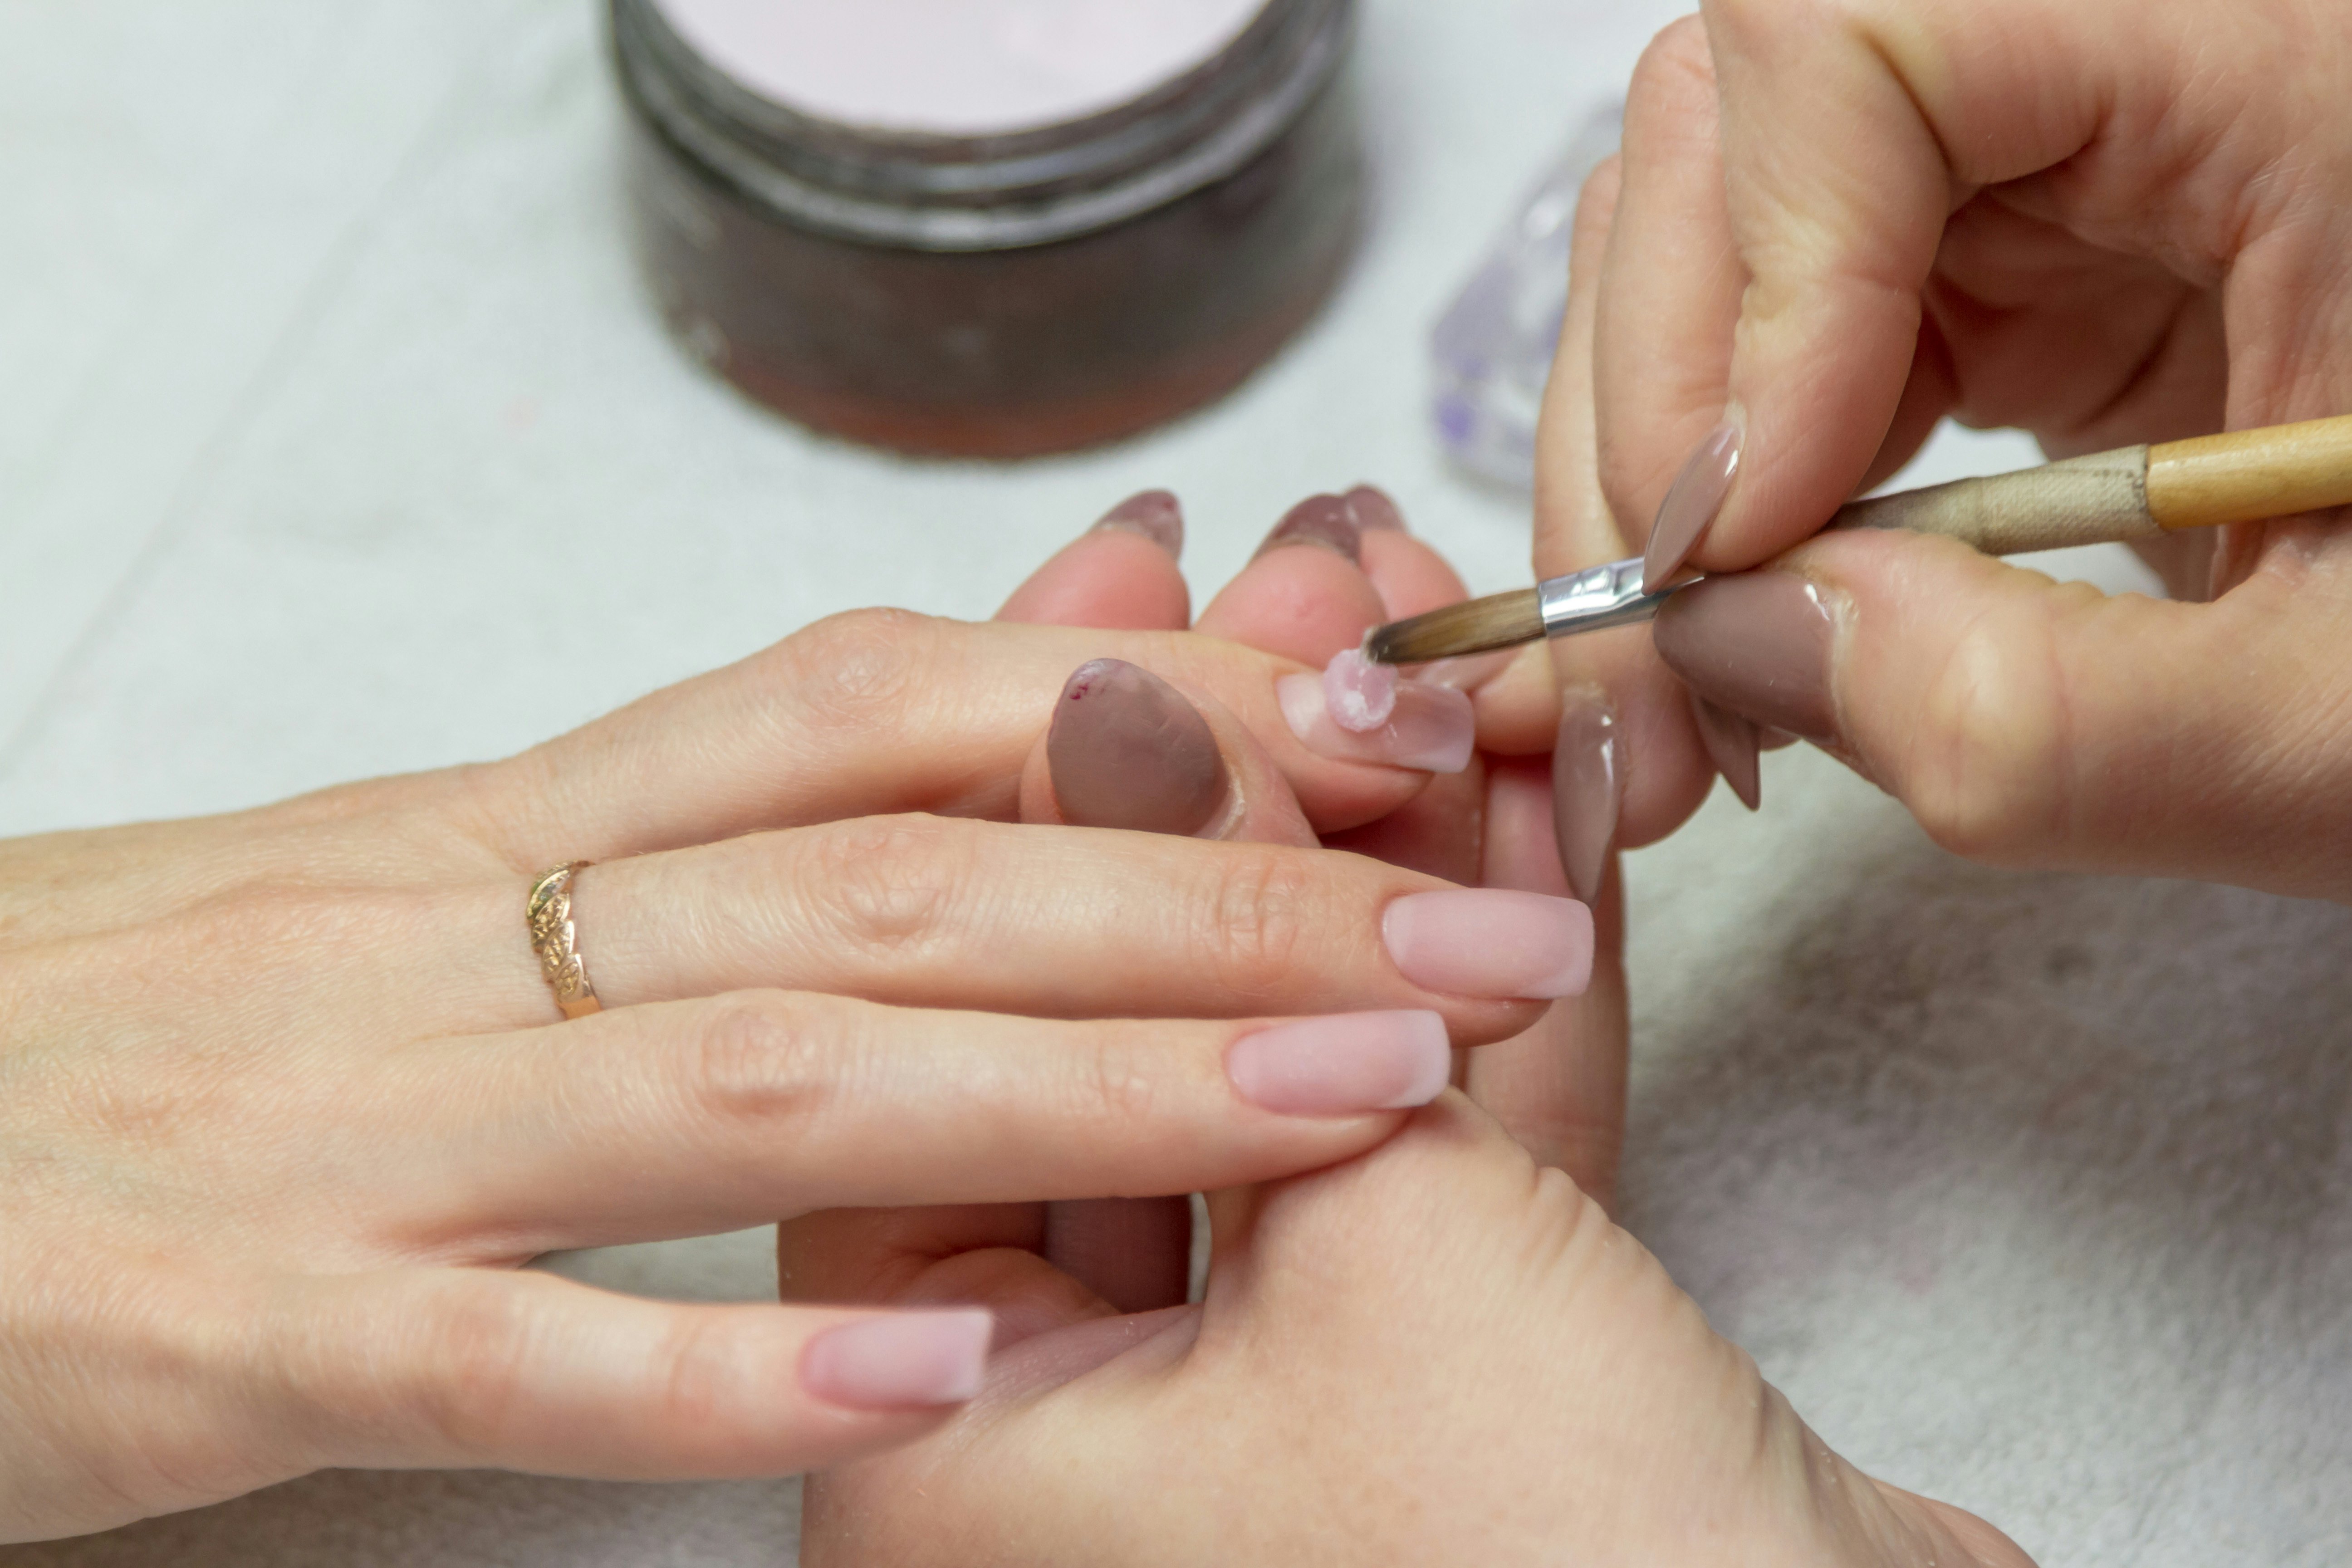 Powder Dip Vs Acrylic Nails The Biggest Differences Explained